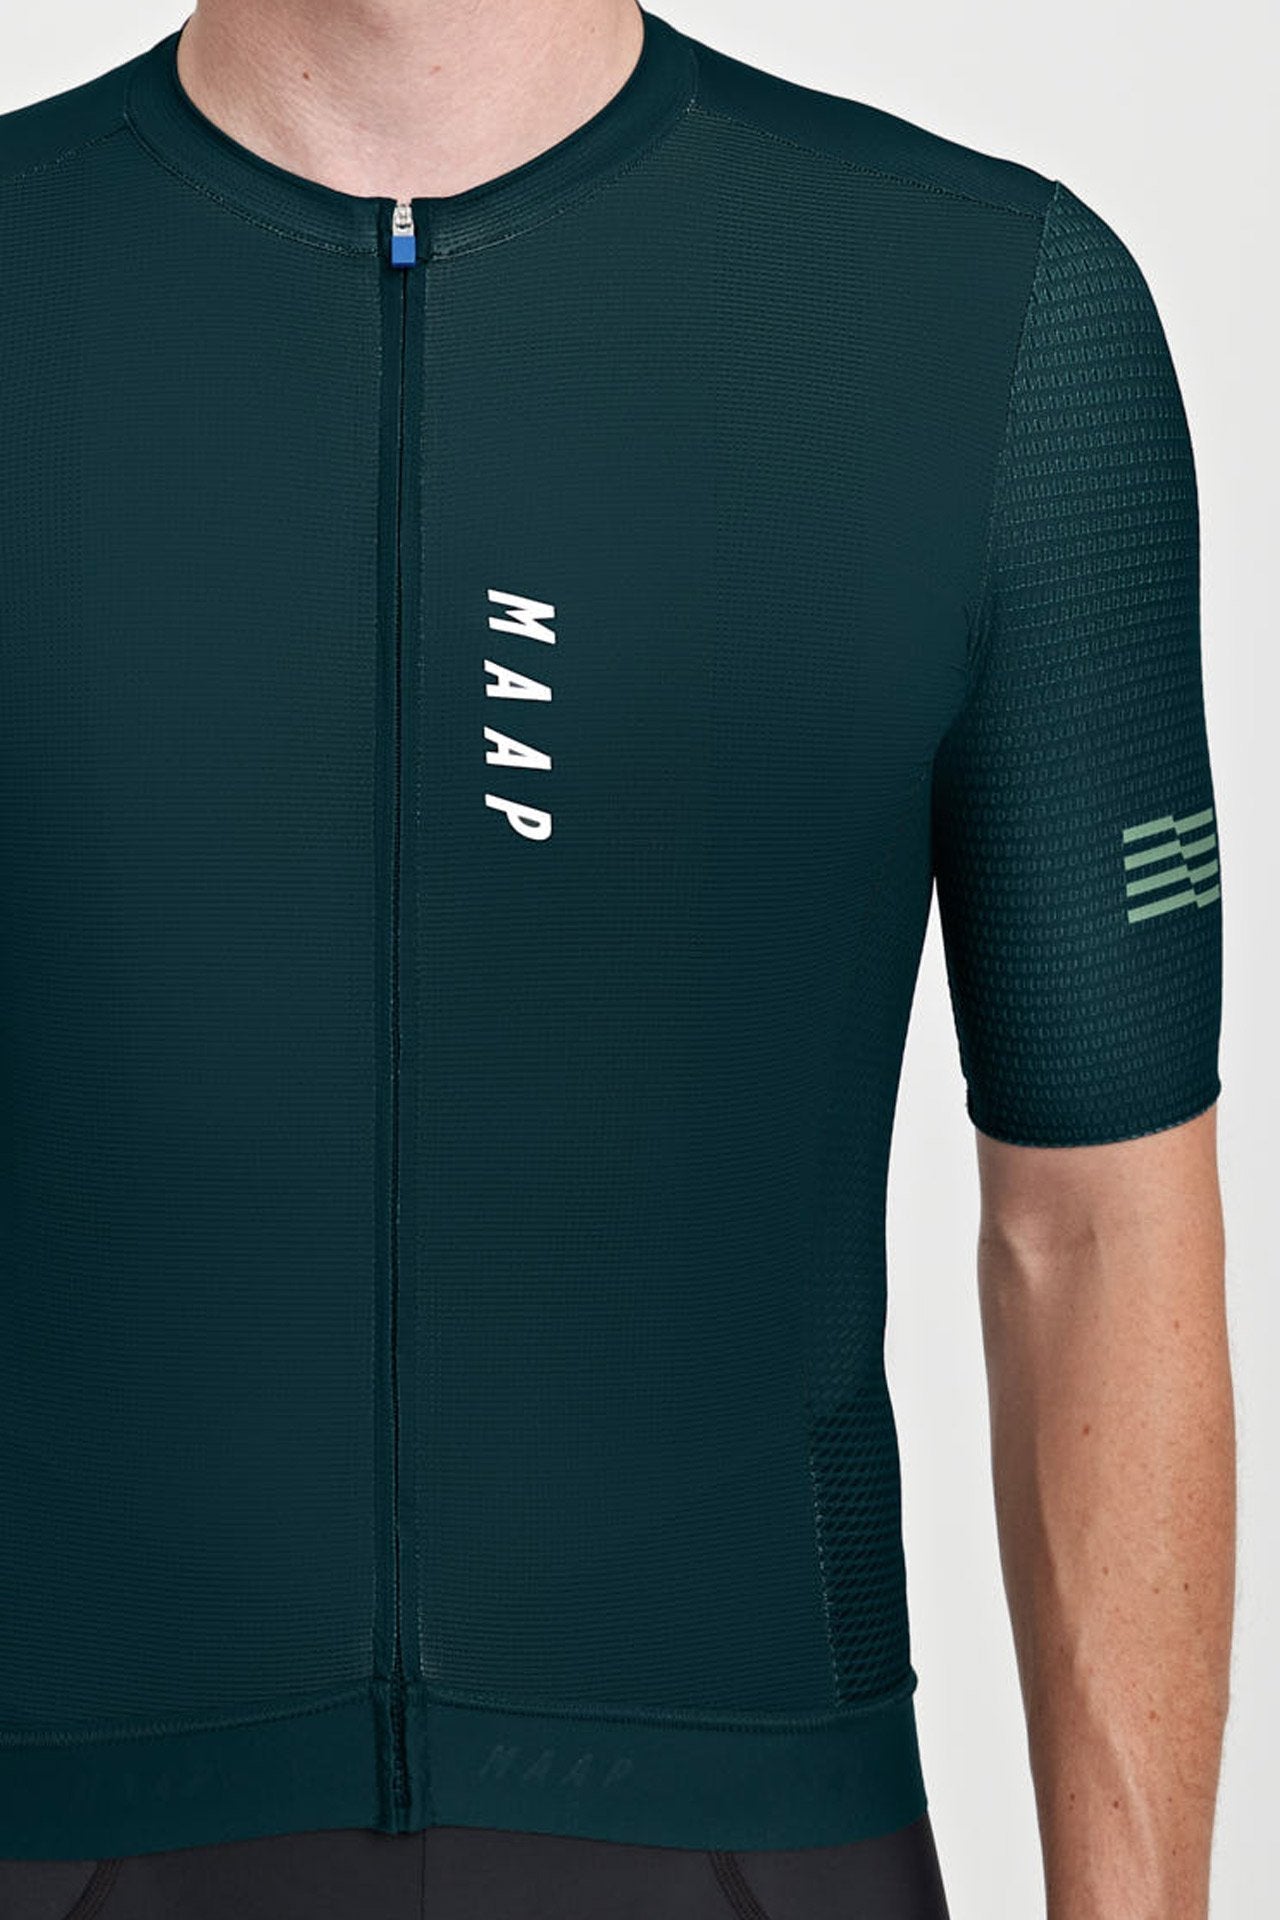 Stealth Race Fit Jersey - Midnight